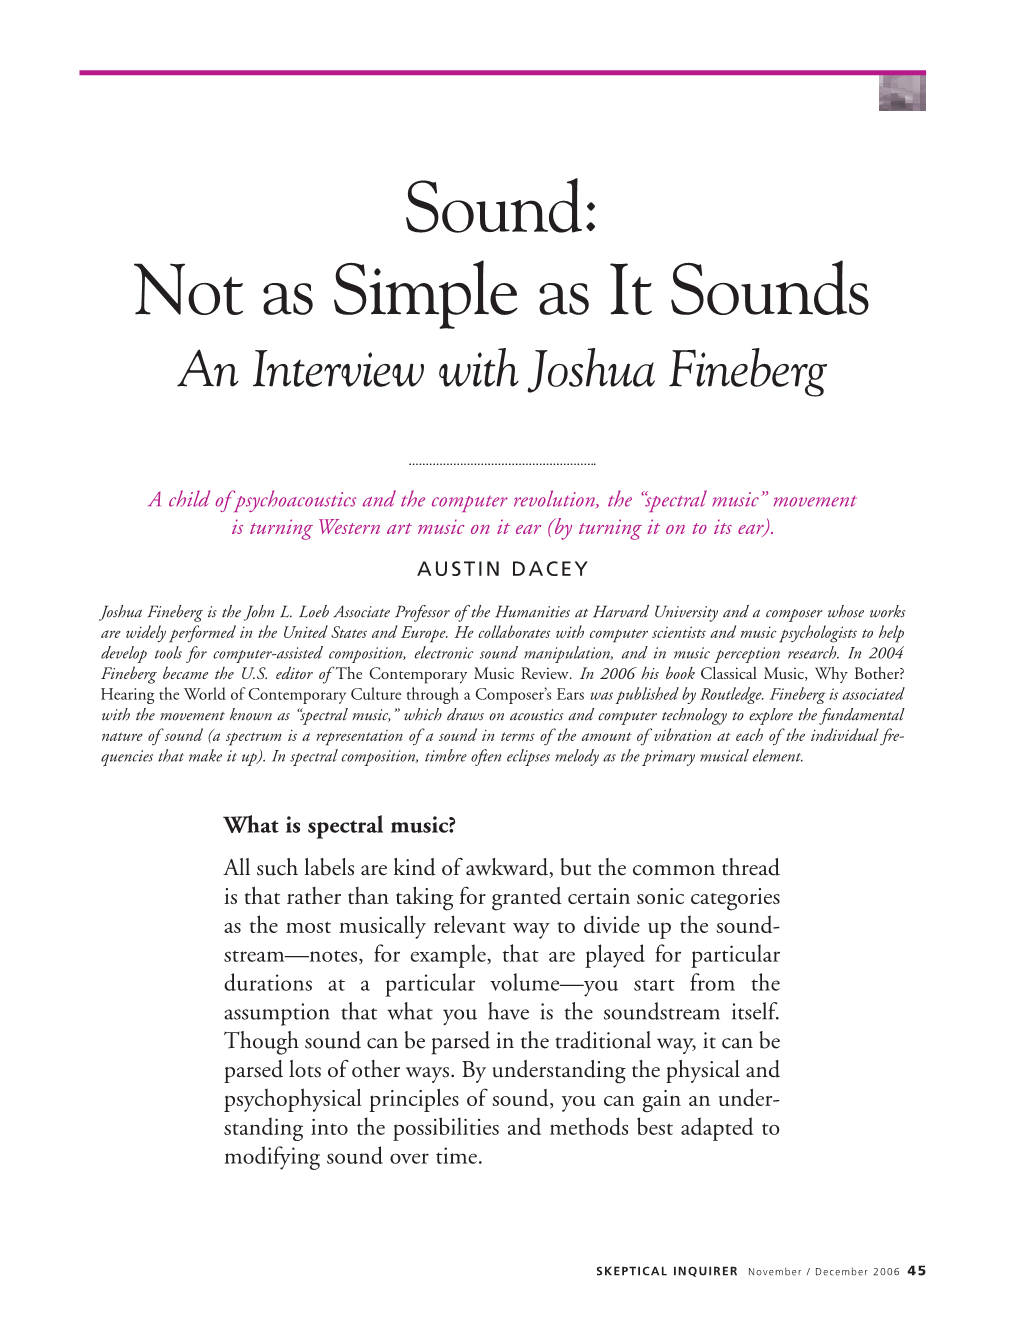 Not As Simple As It Sounds an Interview with Joshua Fineberg